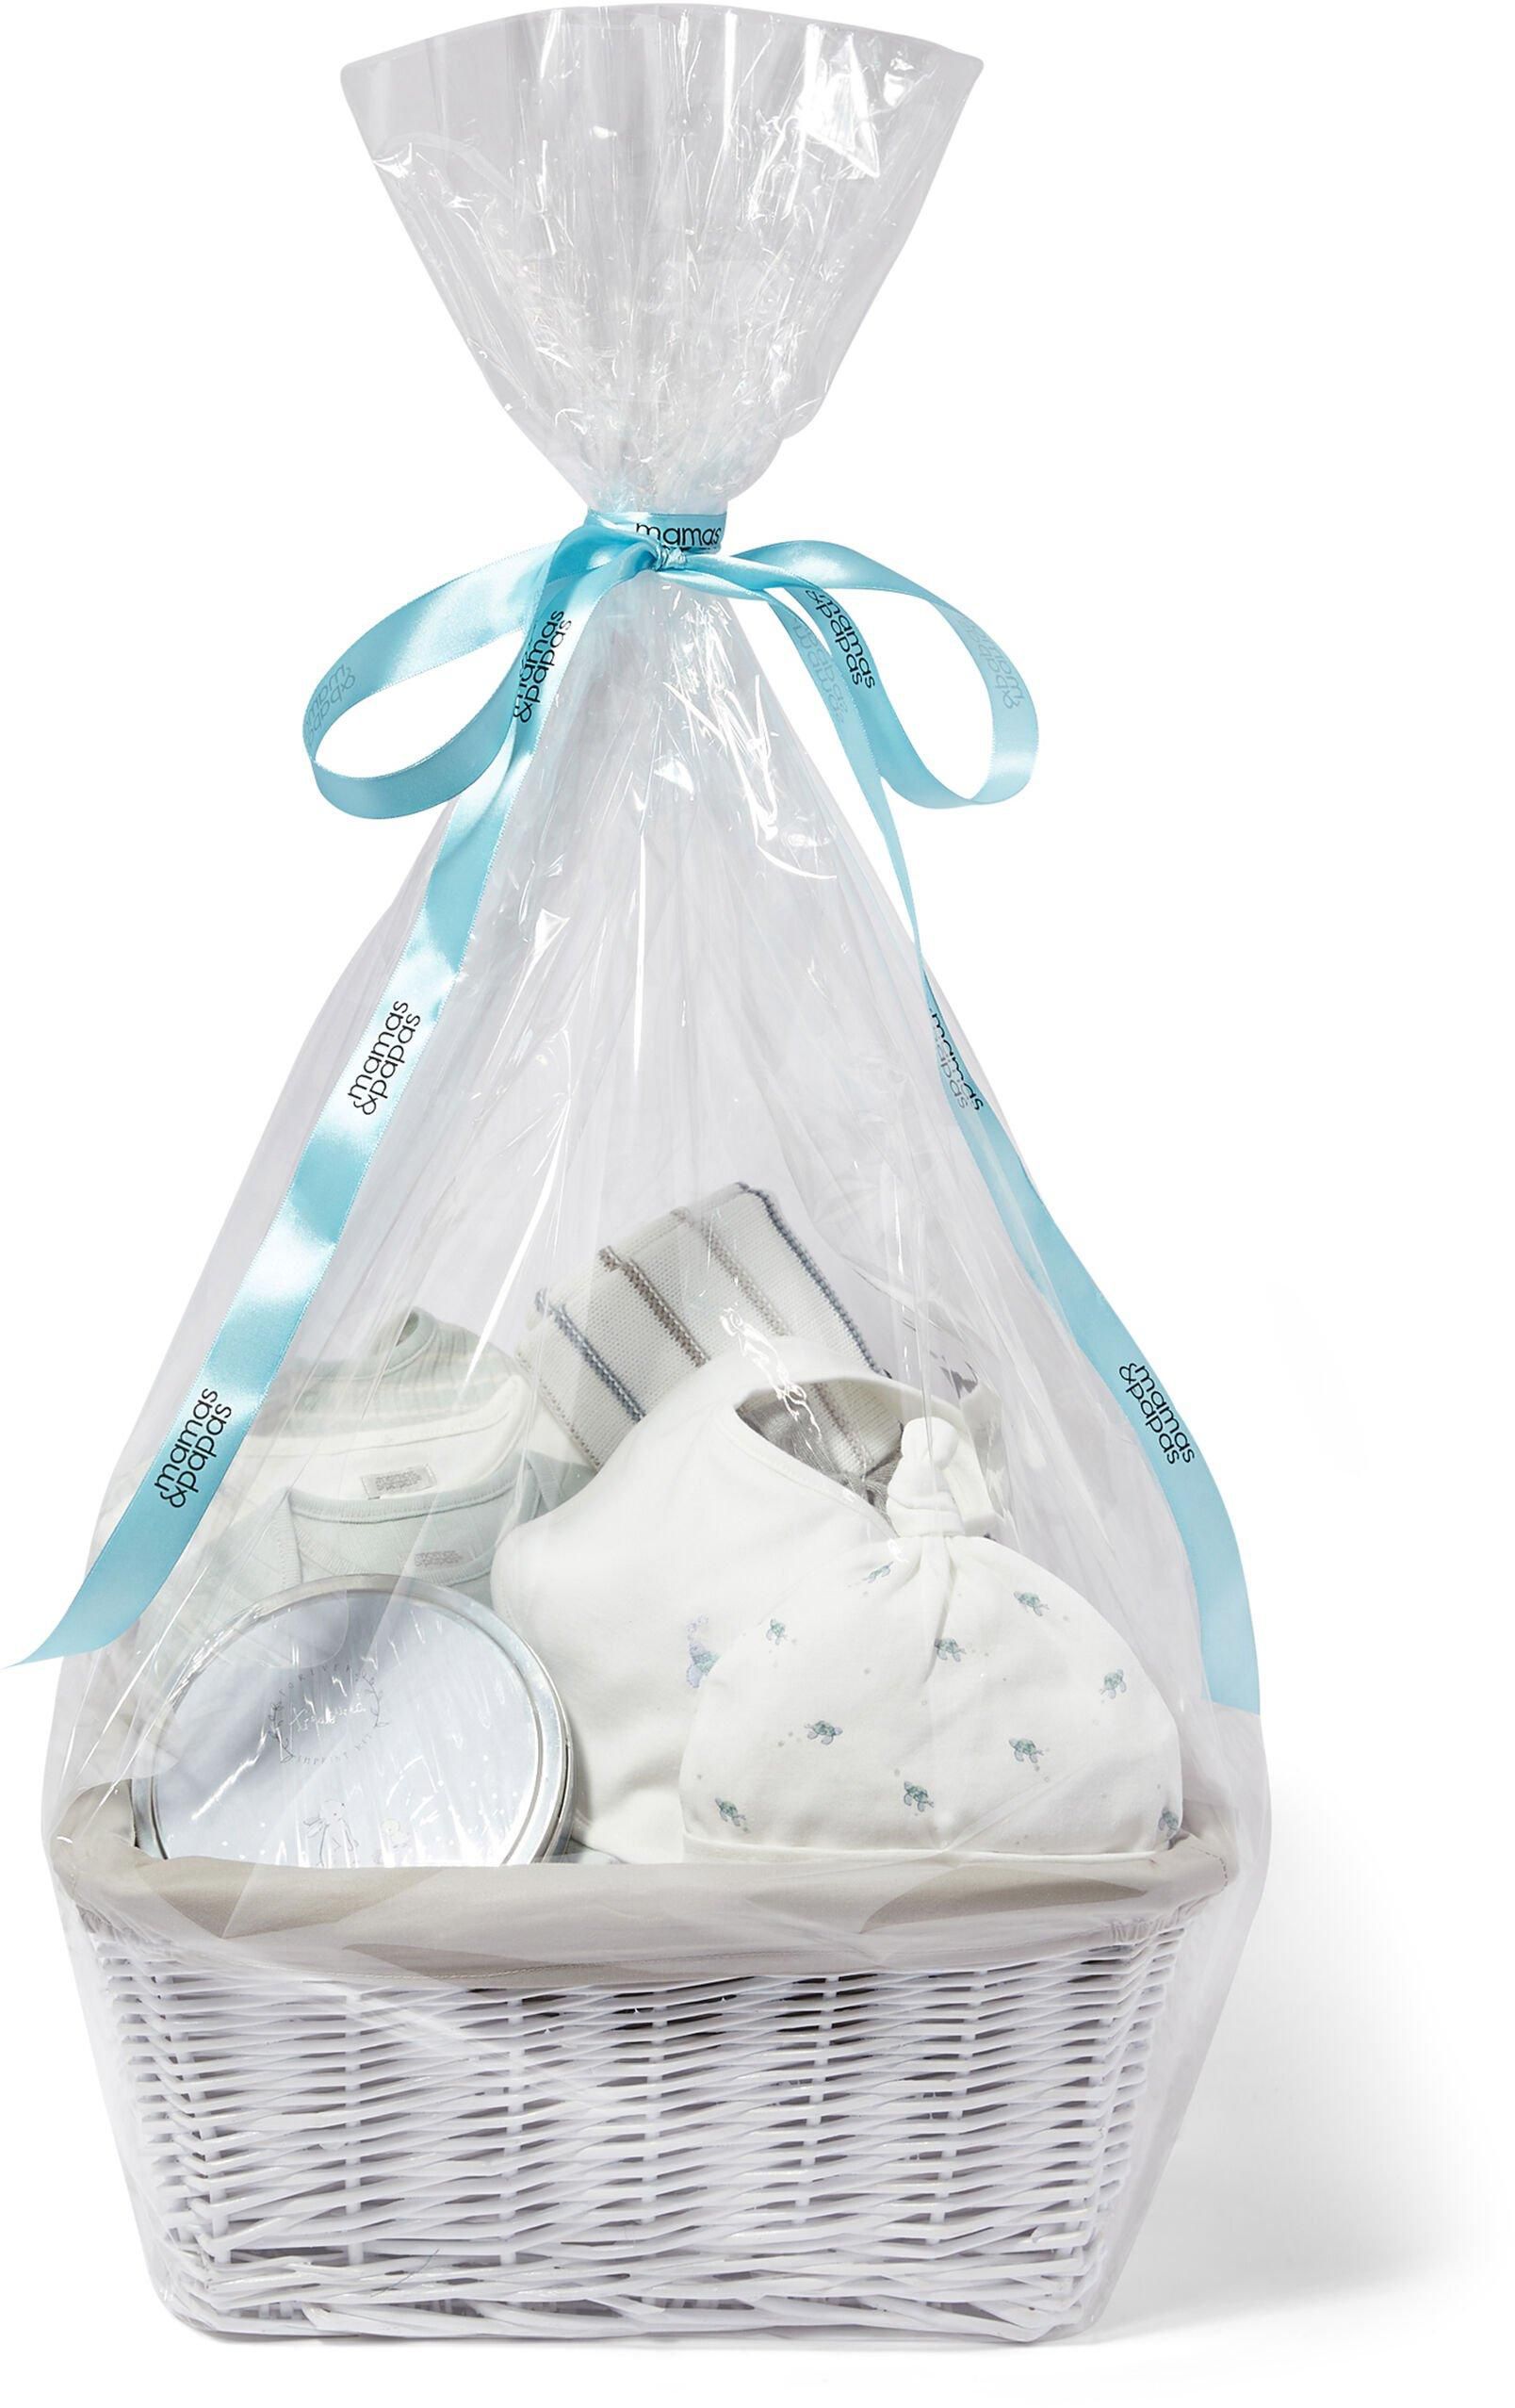 Baby Gift Hamper – 3 Piece with Turtle Print Set